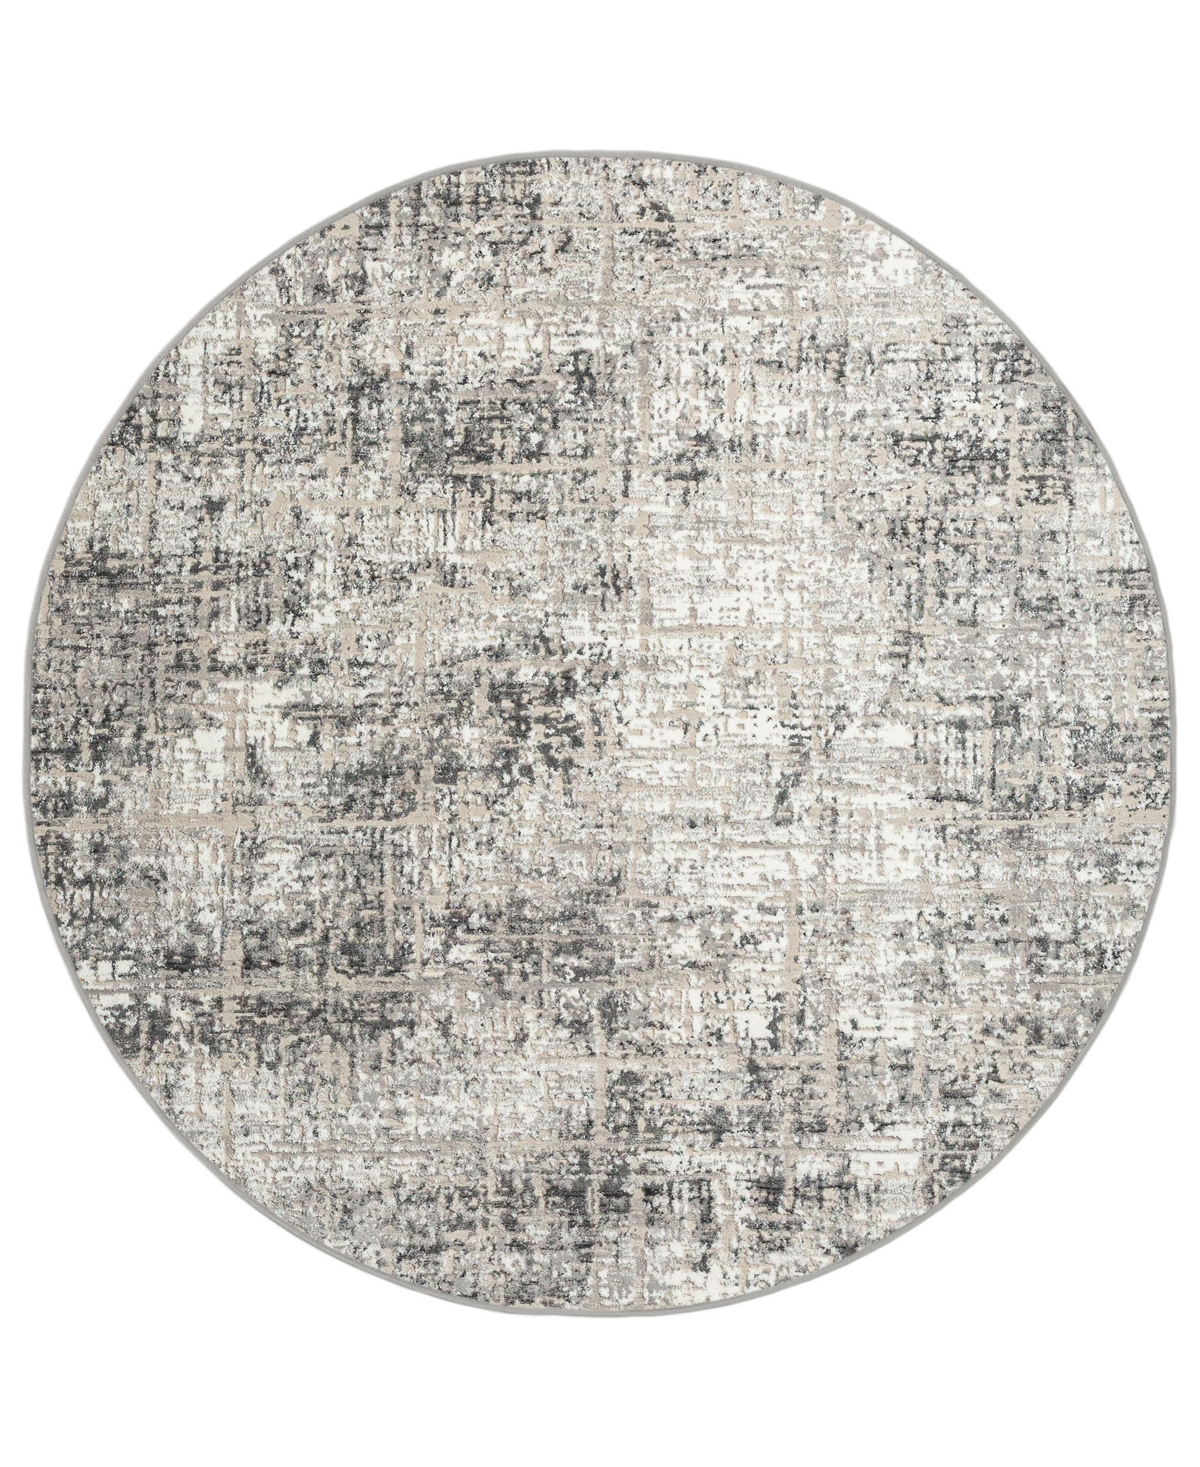 Km Home Teola 1241 7'10in x 7'10in Round Area Rug - Gray